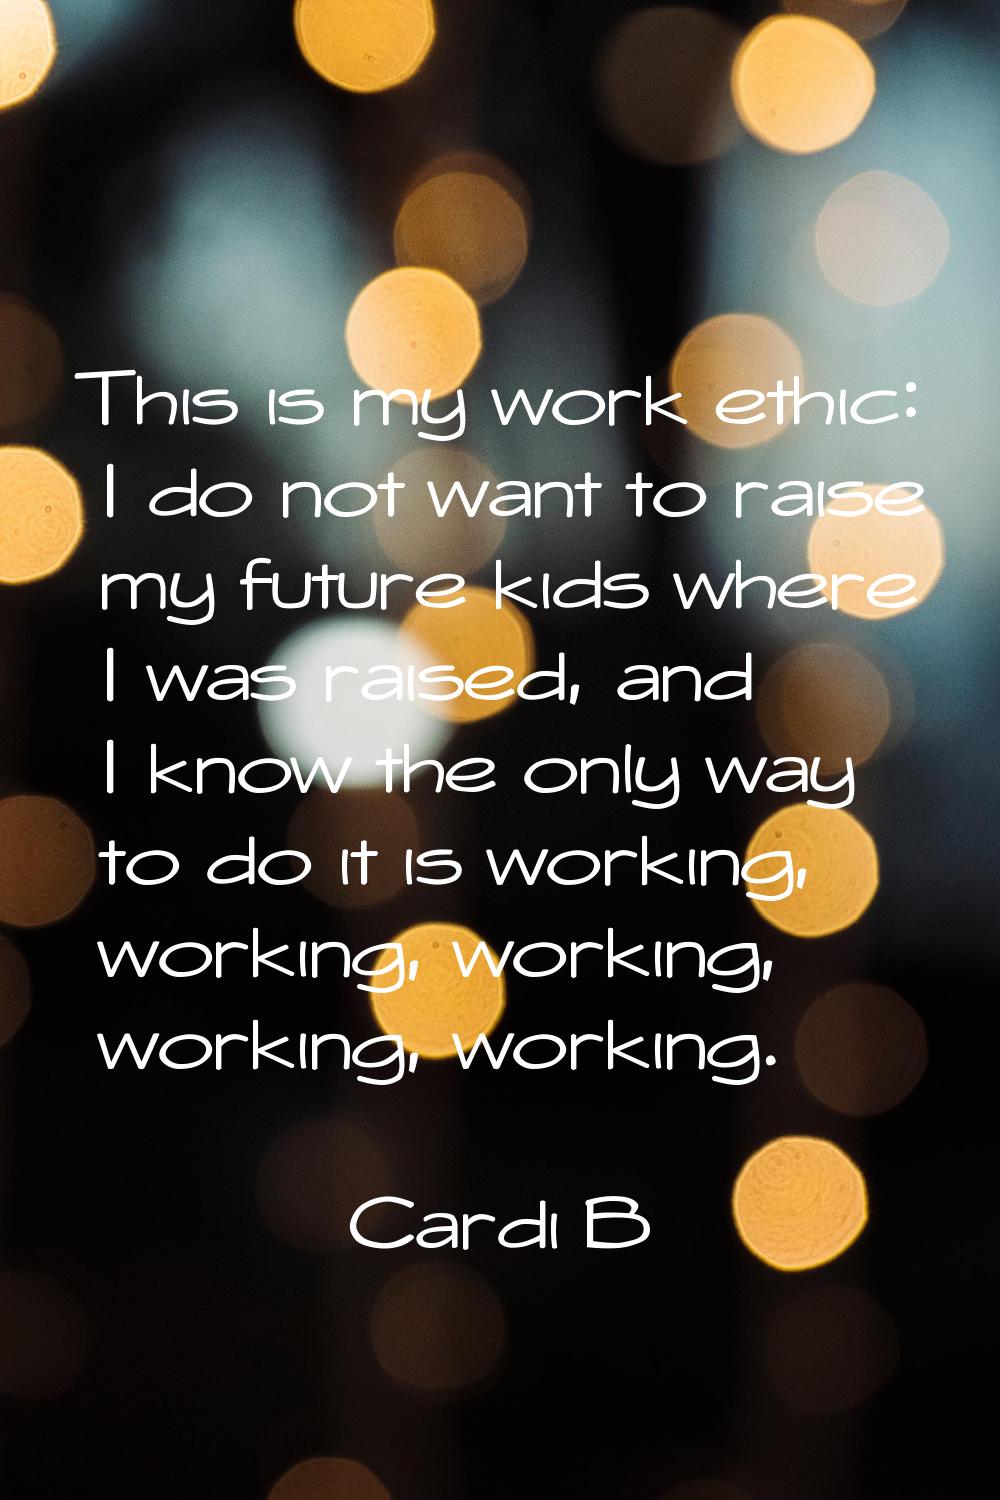 This is my work ethic: I do not want to raise my future kids where I was raised, and I know the onl